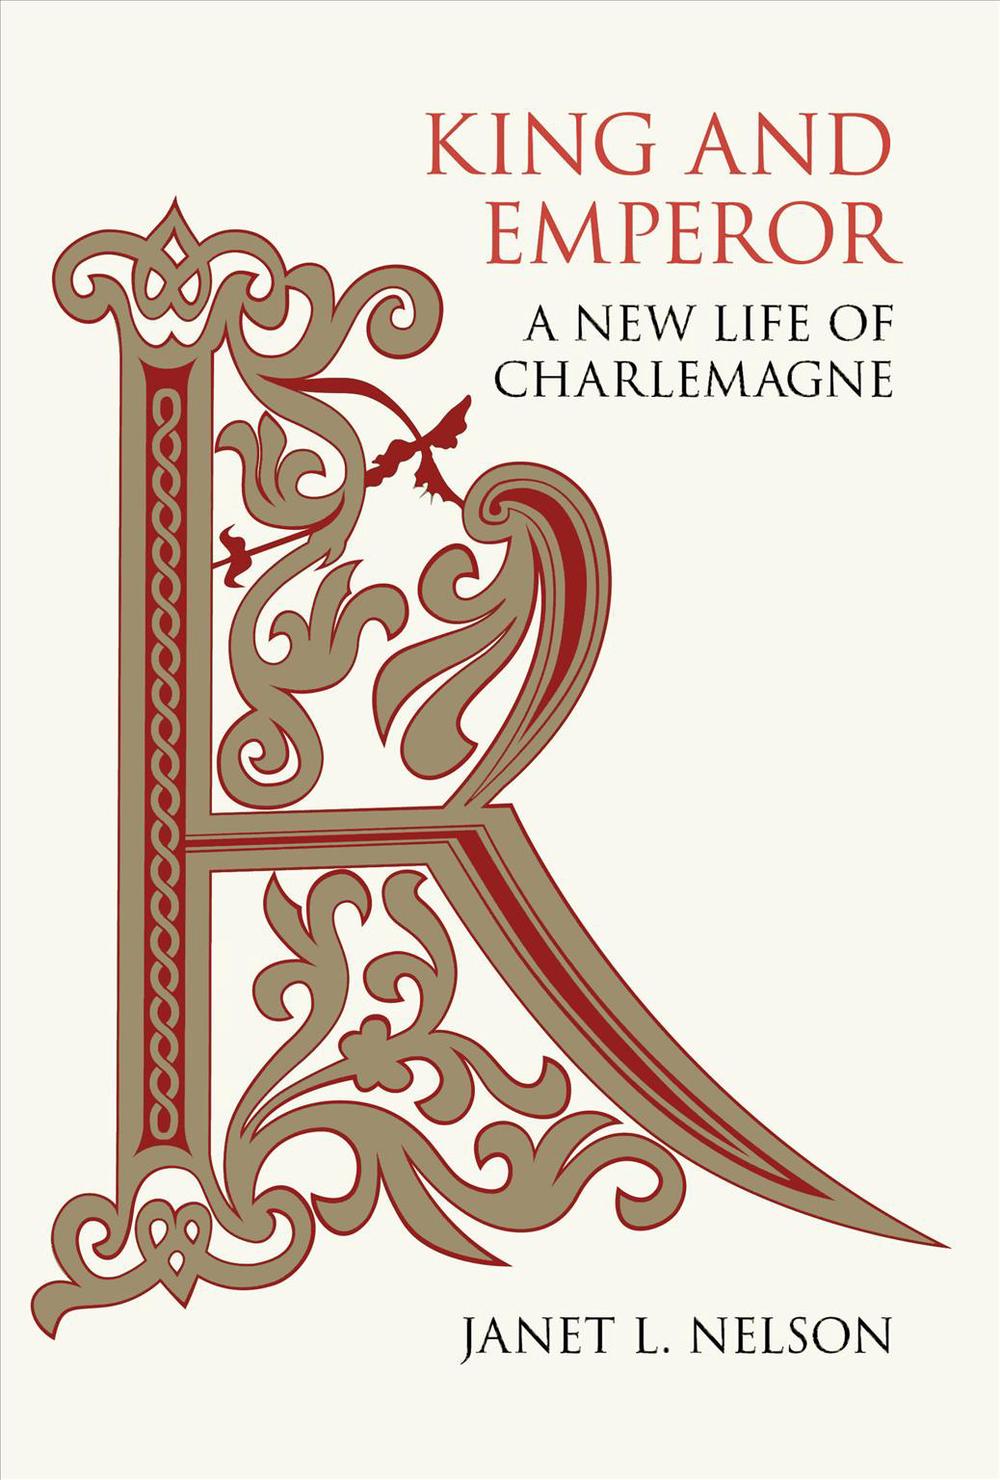 Kind and Emperor: A New Life of Charlemagne